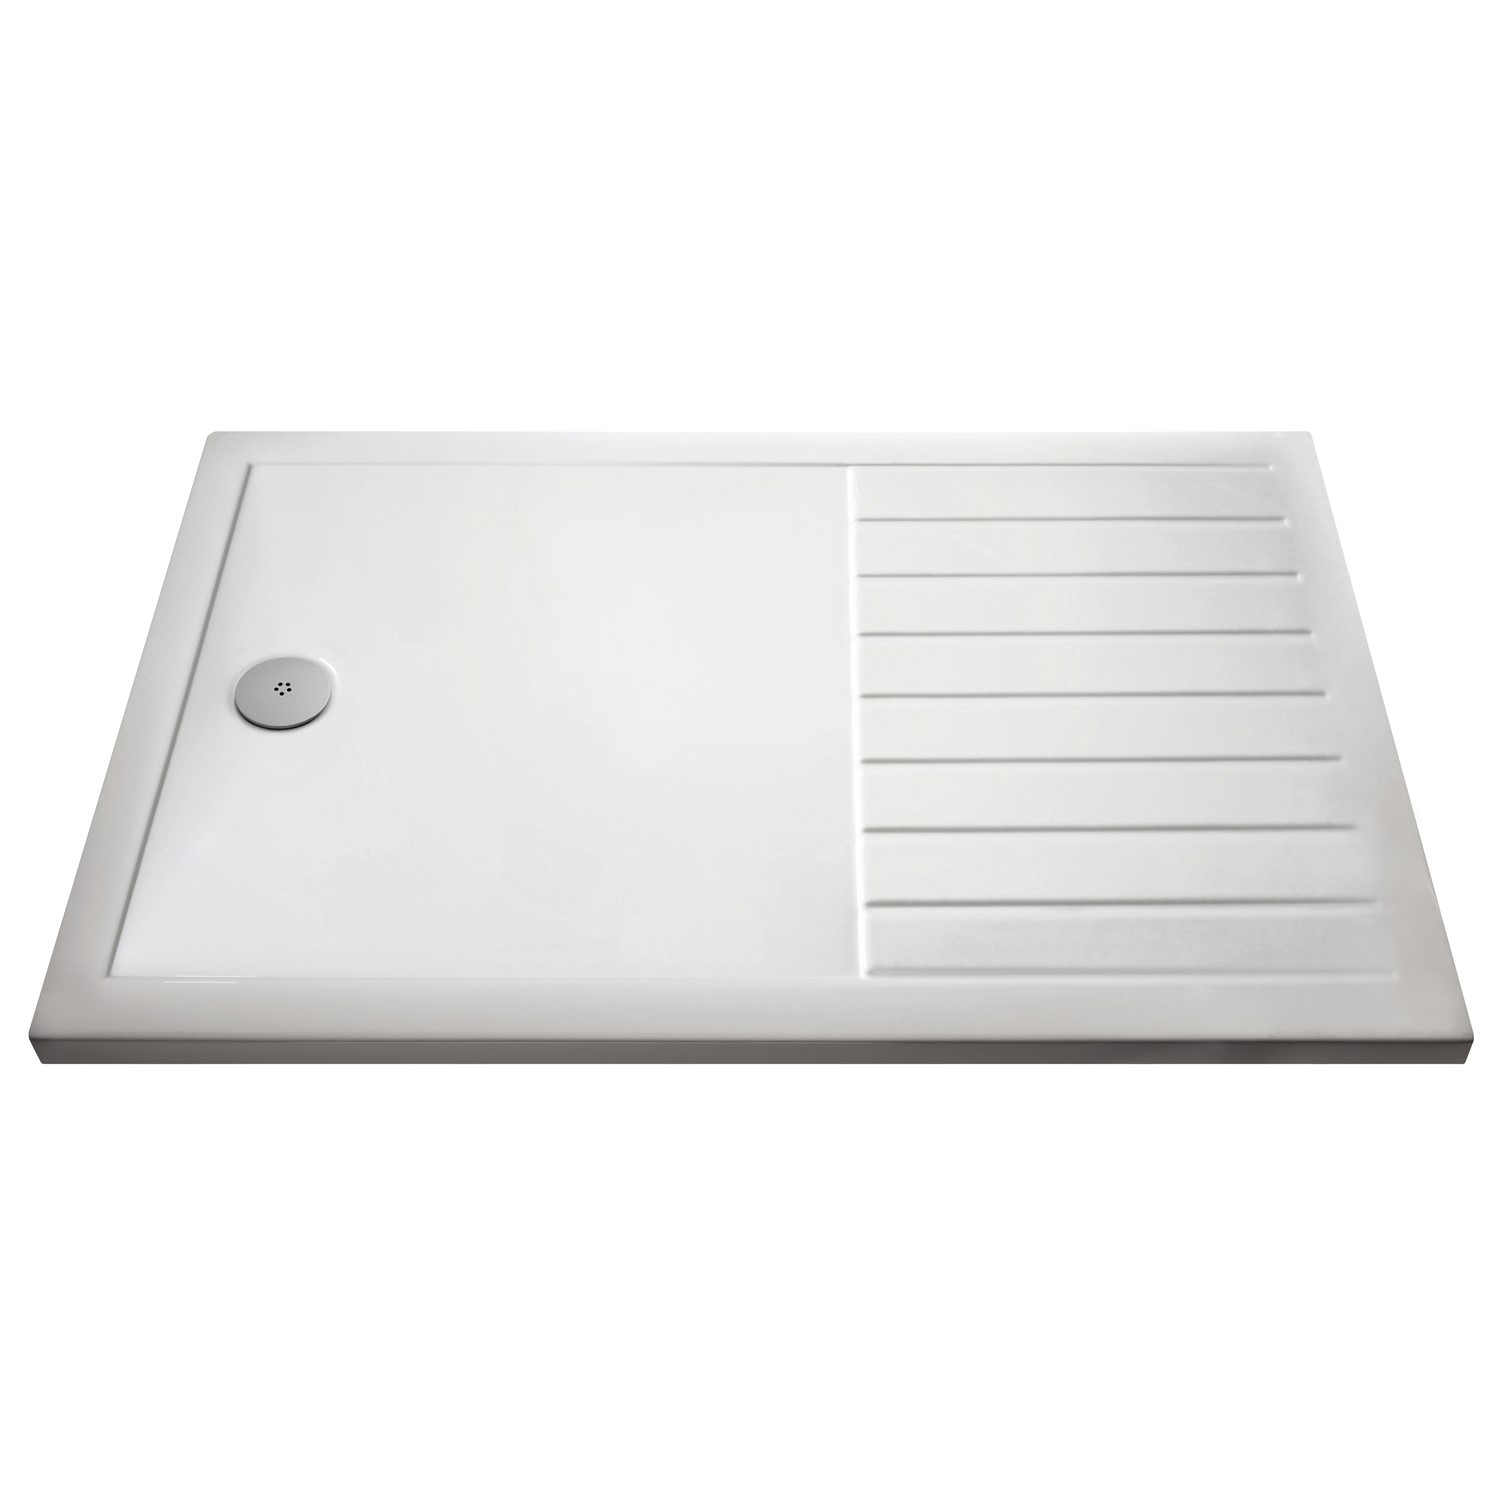 Low Profile Rectangular Walk In Shower Tray 1600 x 800mm - Purity